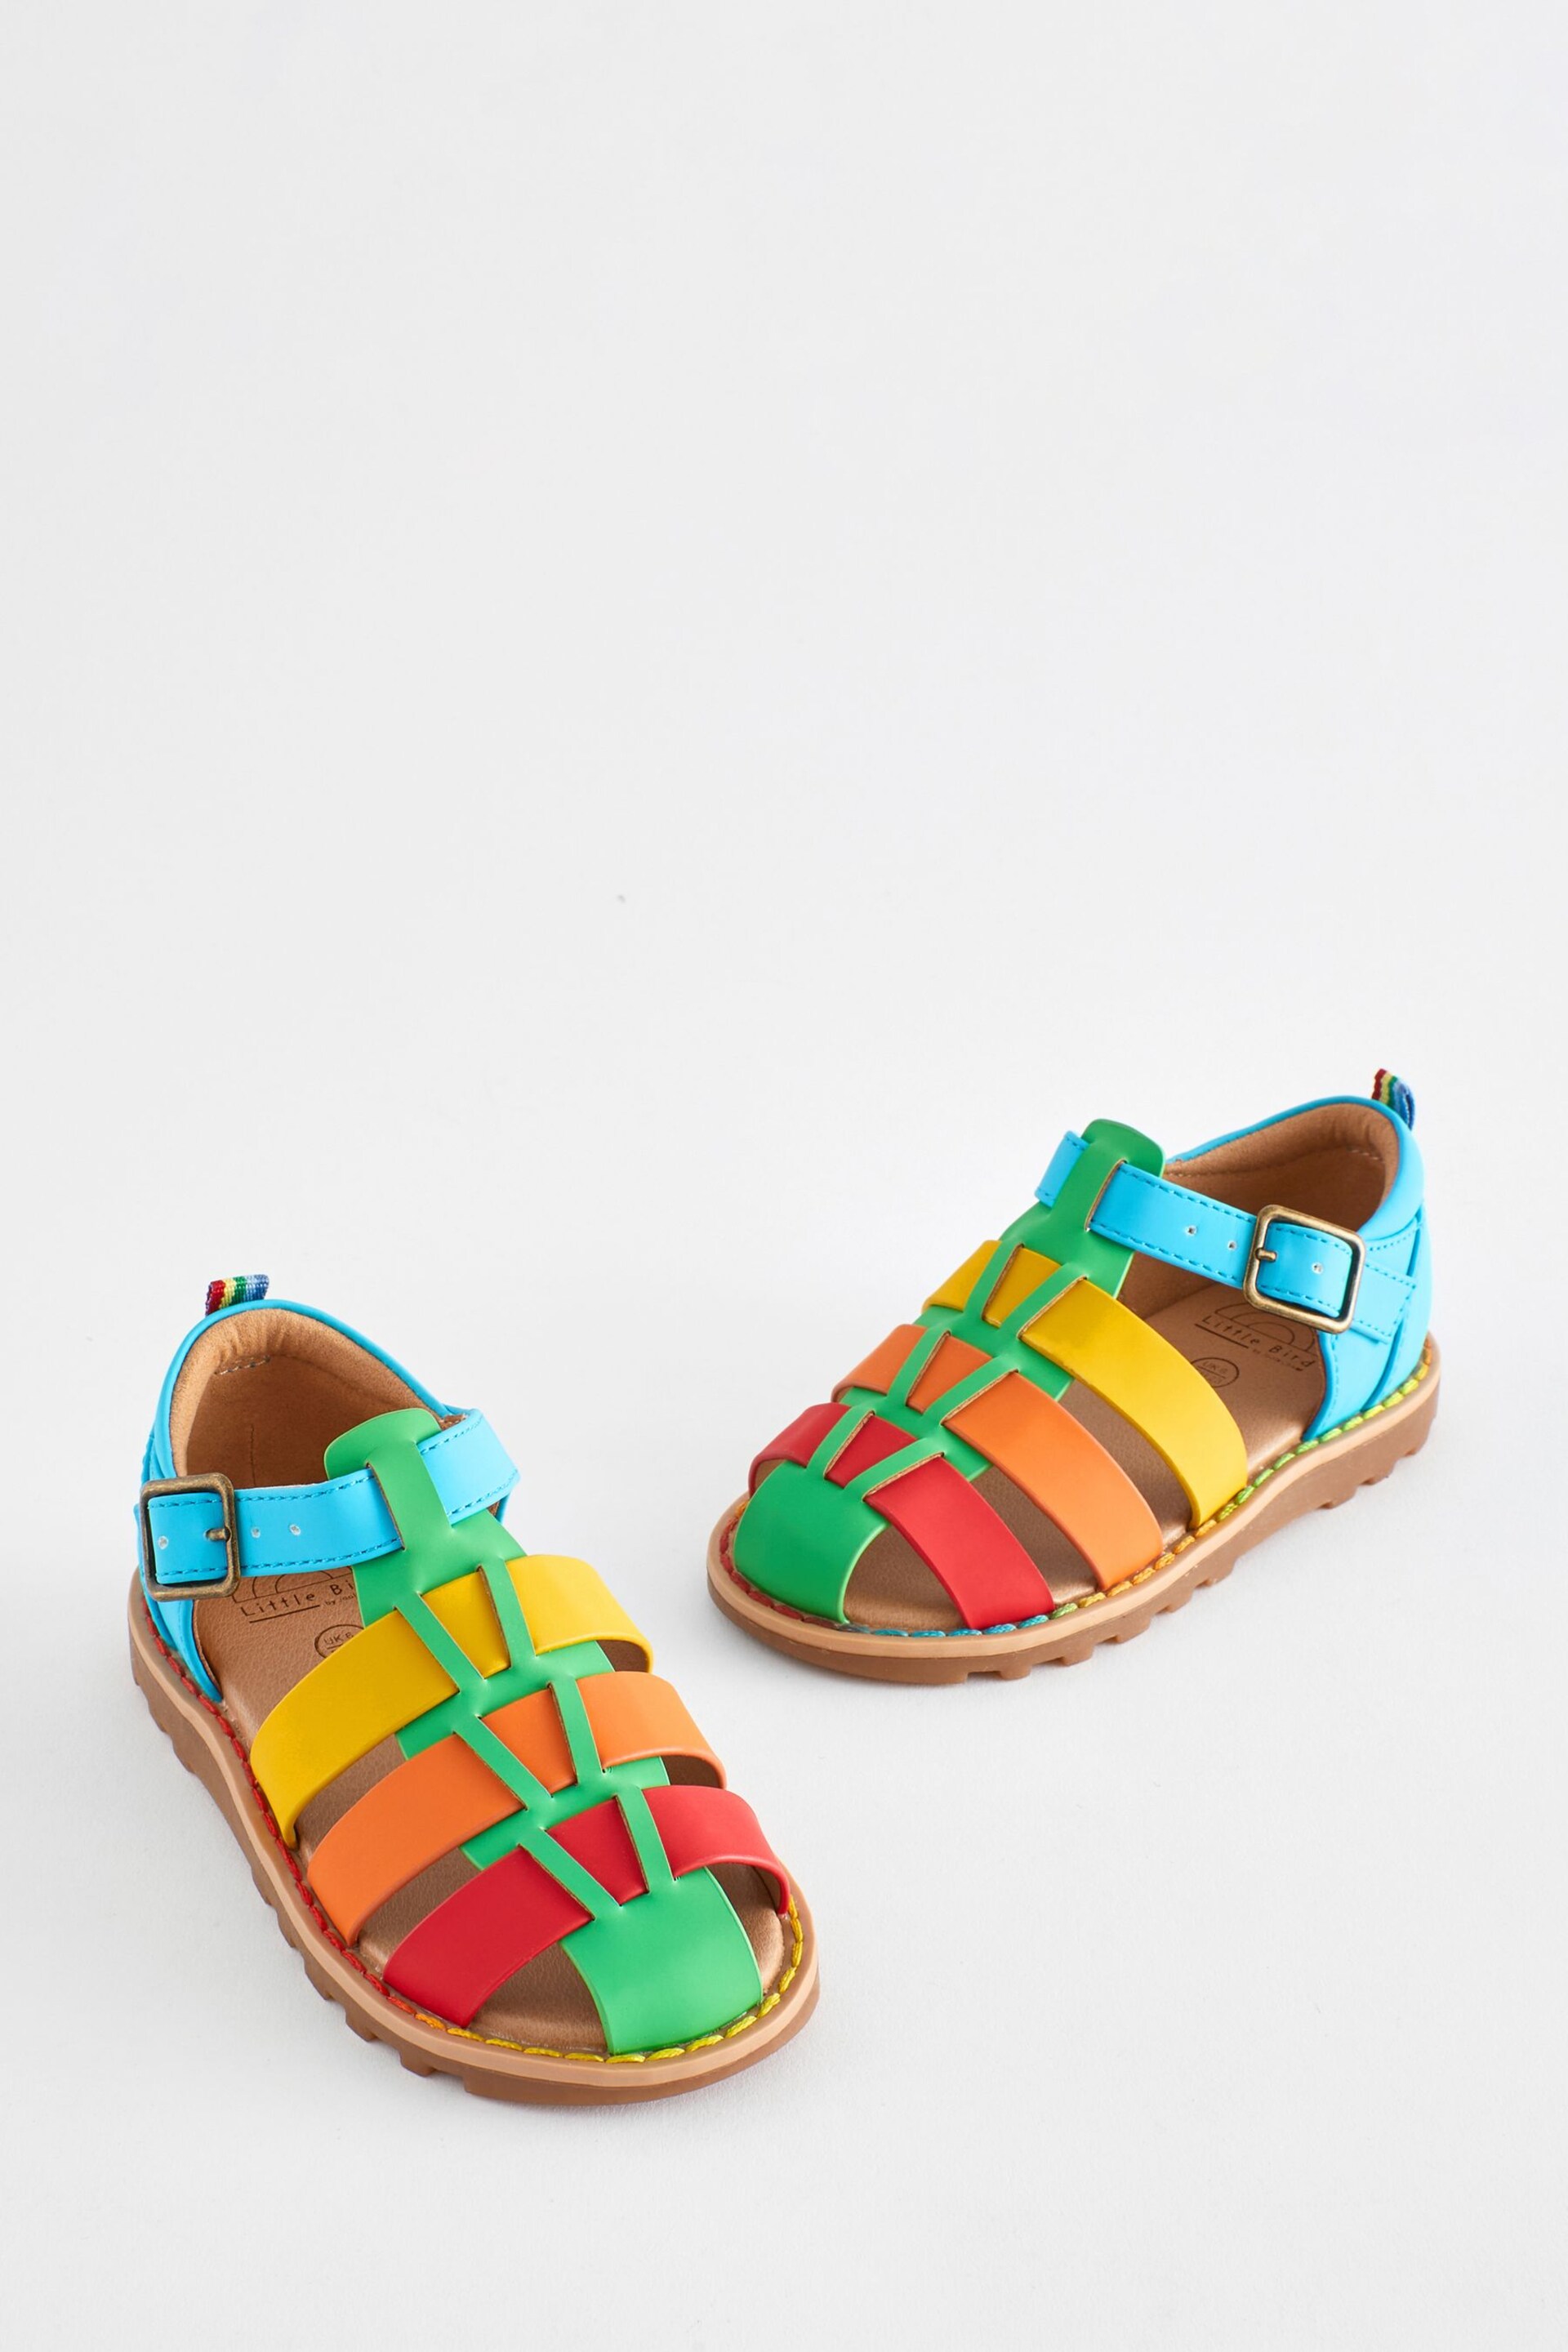 Little Bird by Jools Oliver Blue Fisherman Sandals - Image 1 of 6